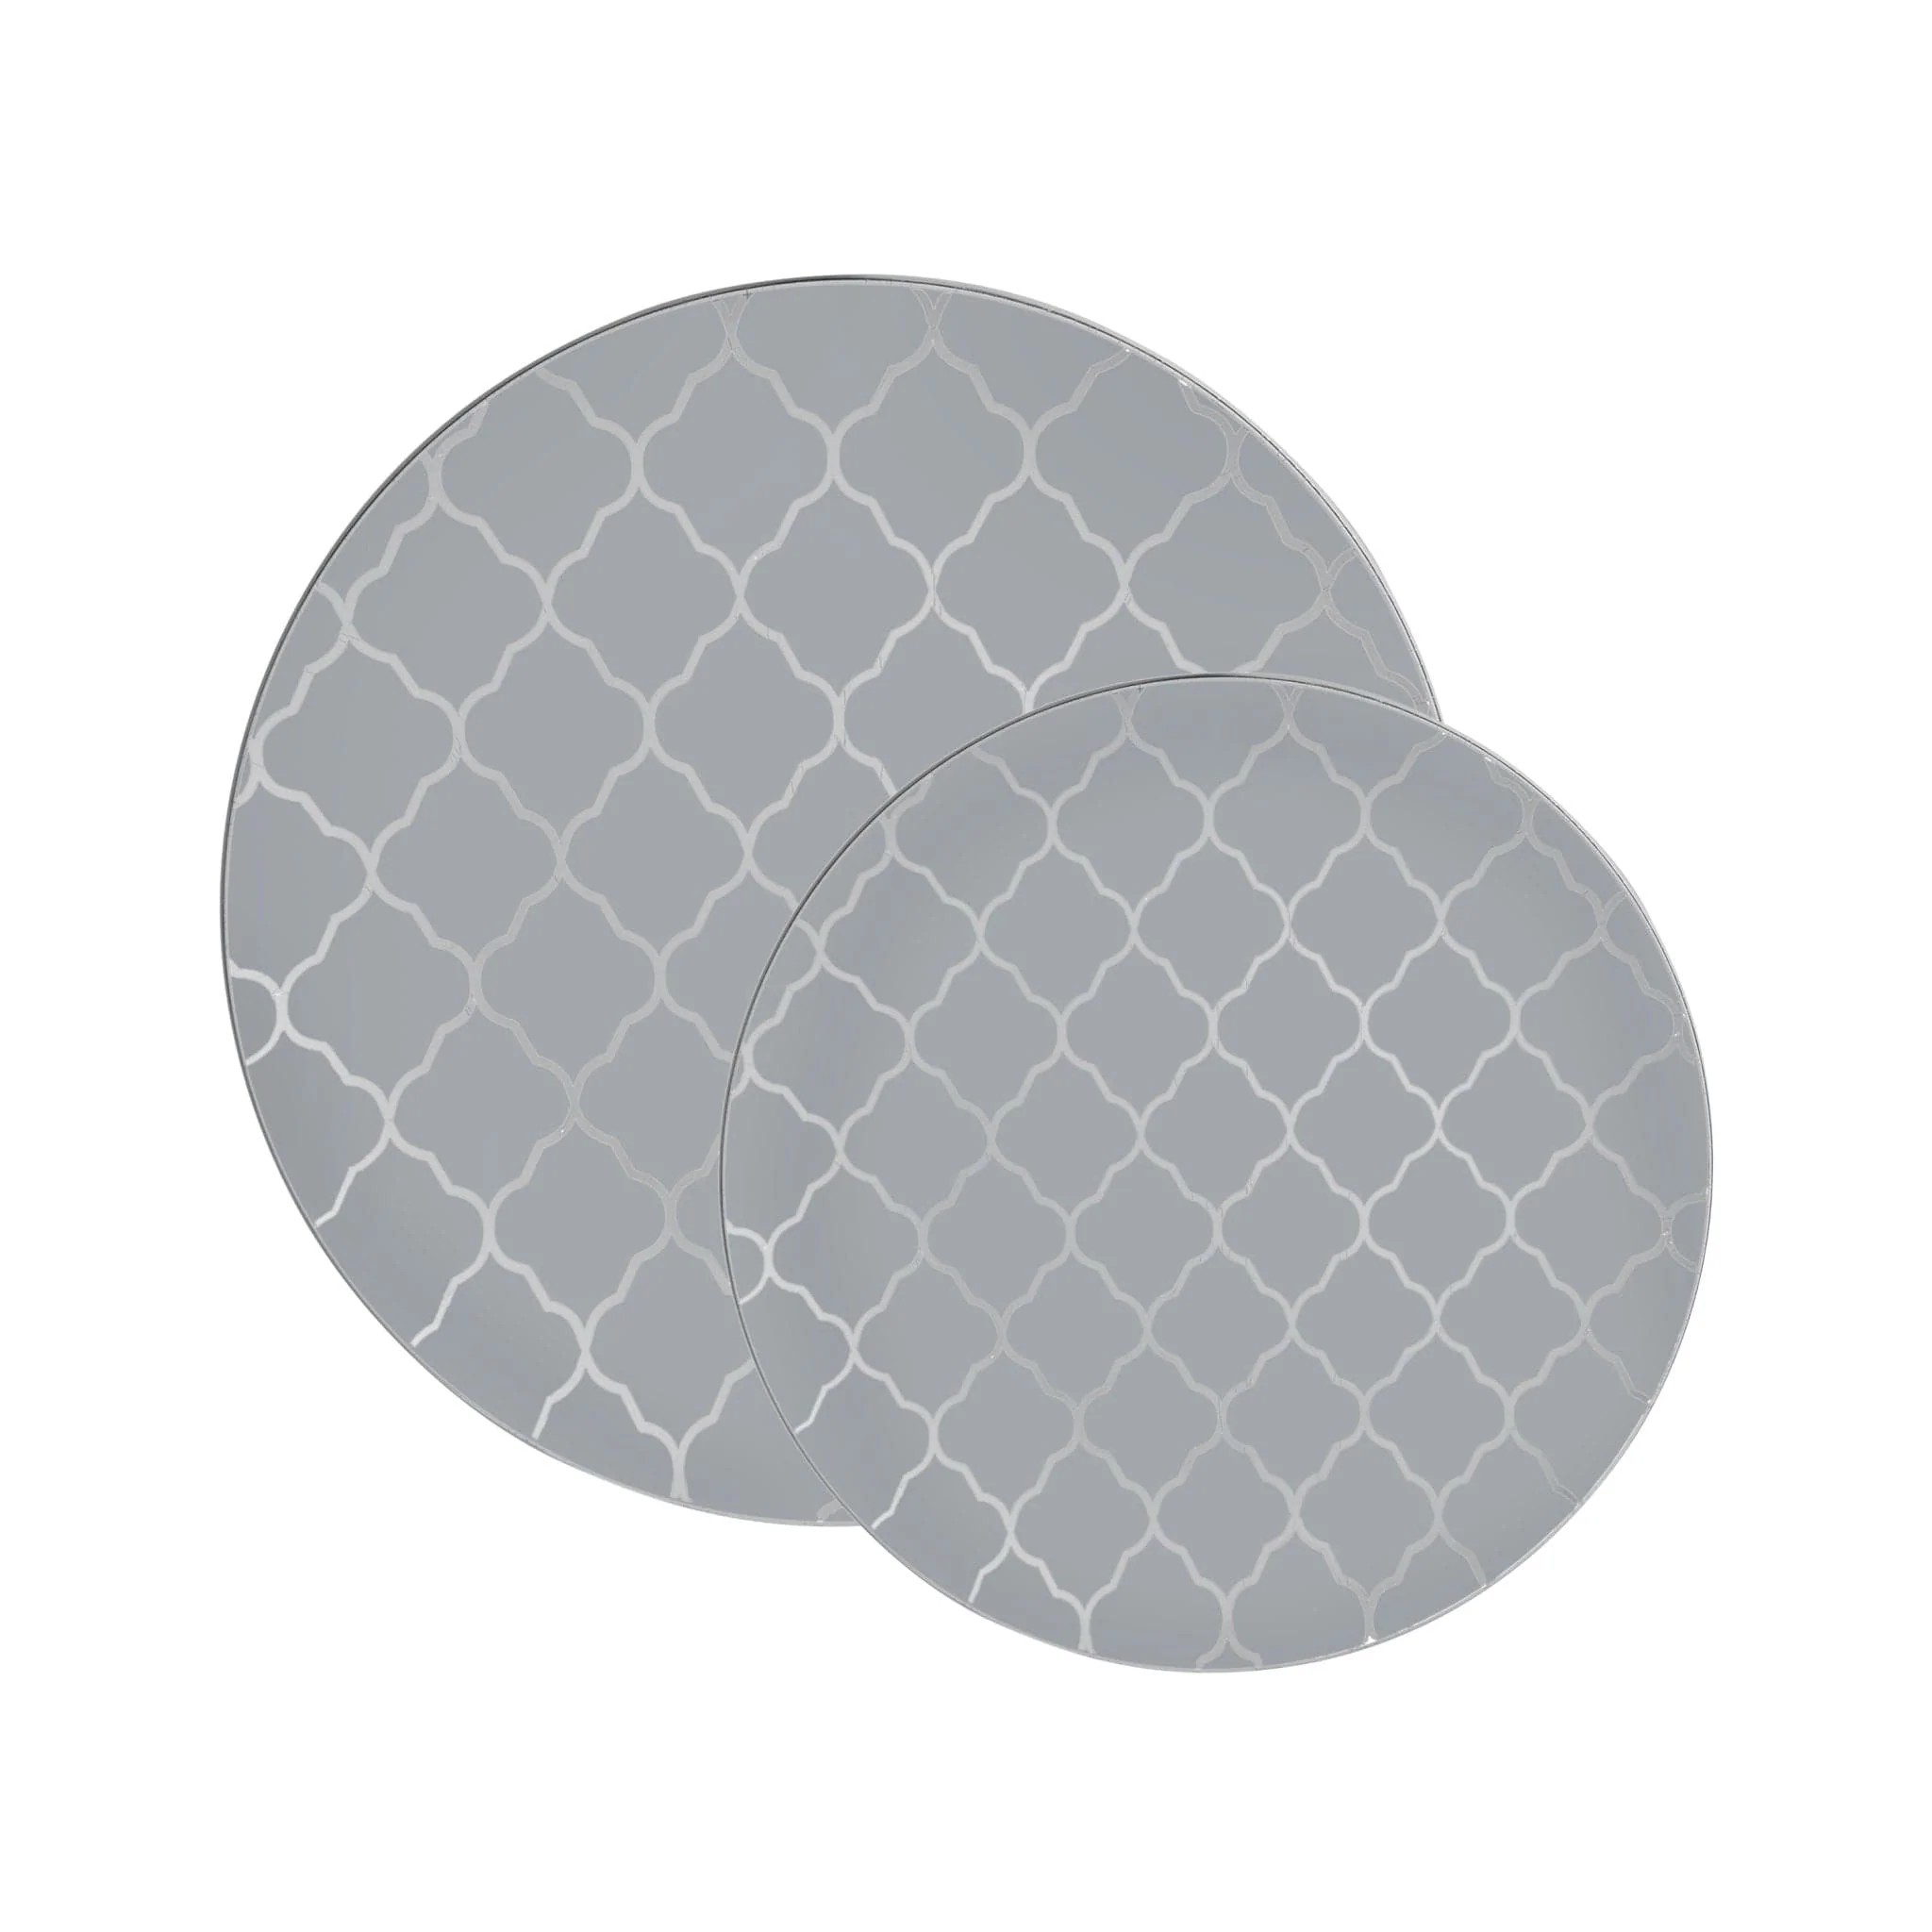 Luxe Party Gray with Silver Lattice Pattern Plastic Dinner Plate 10.25